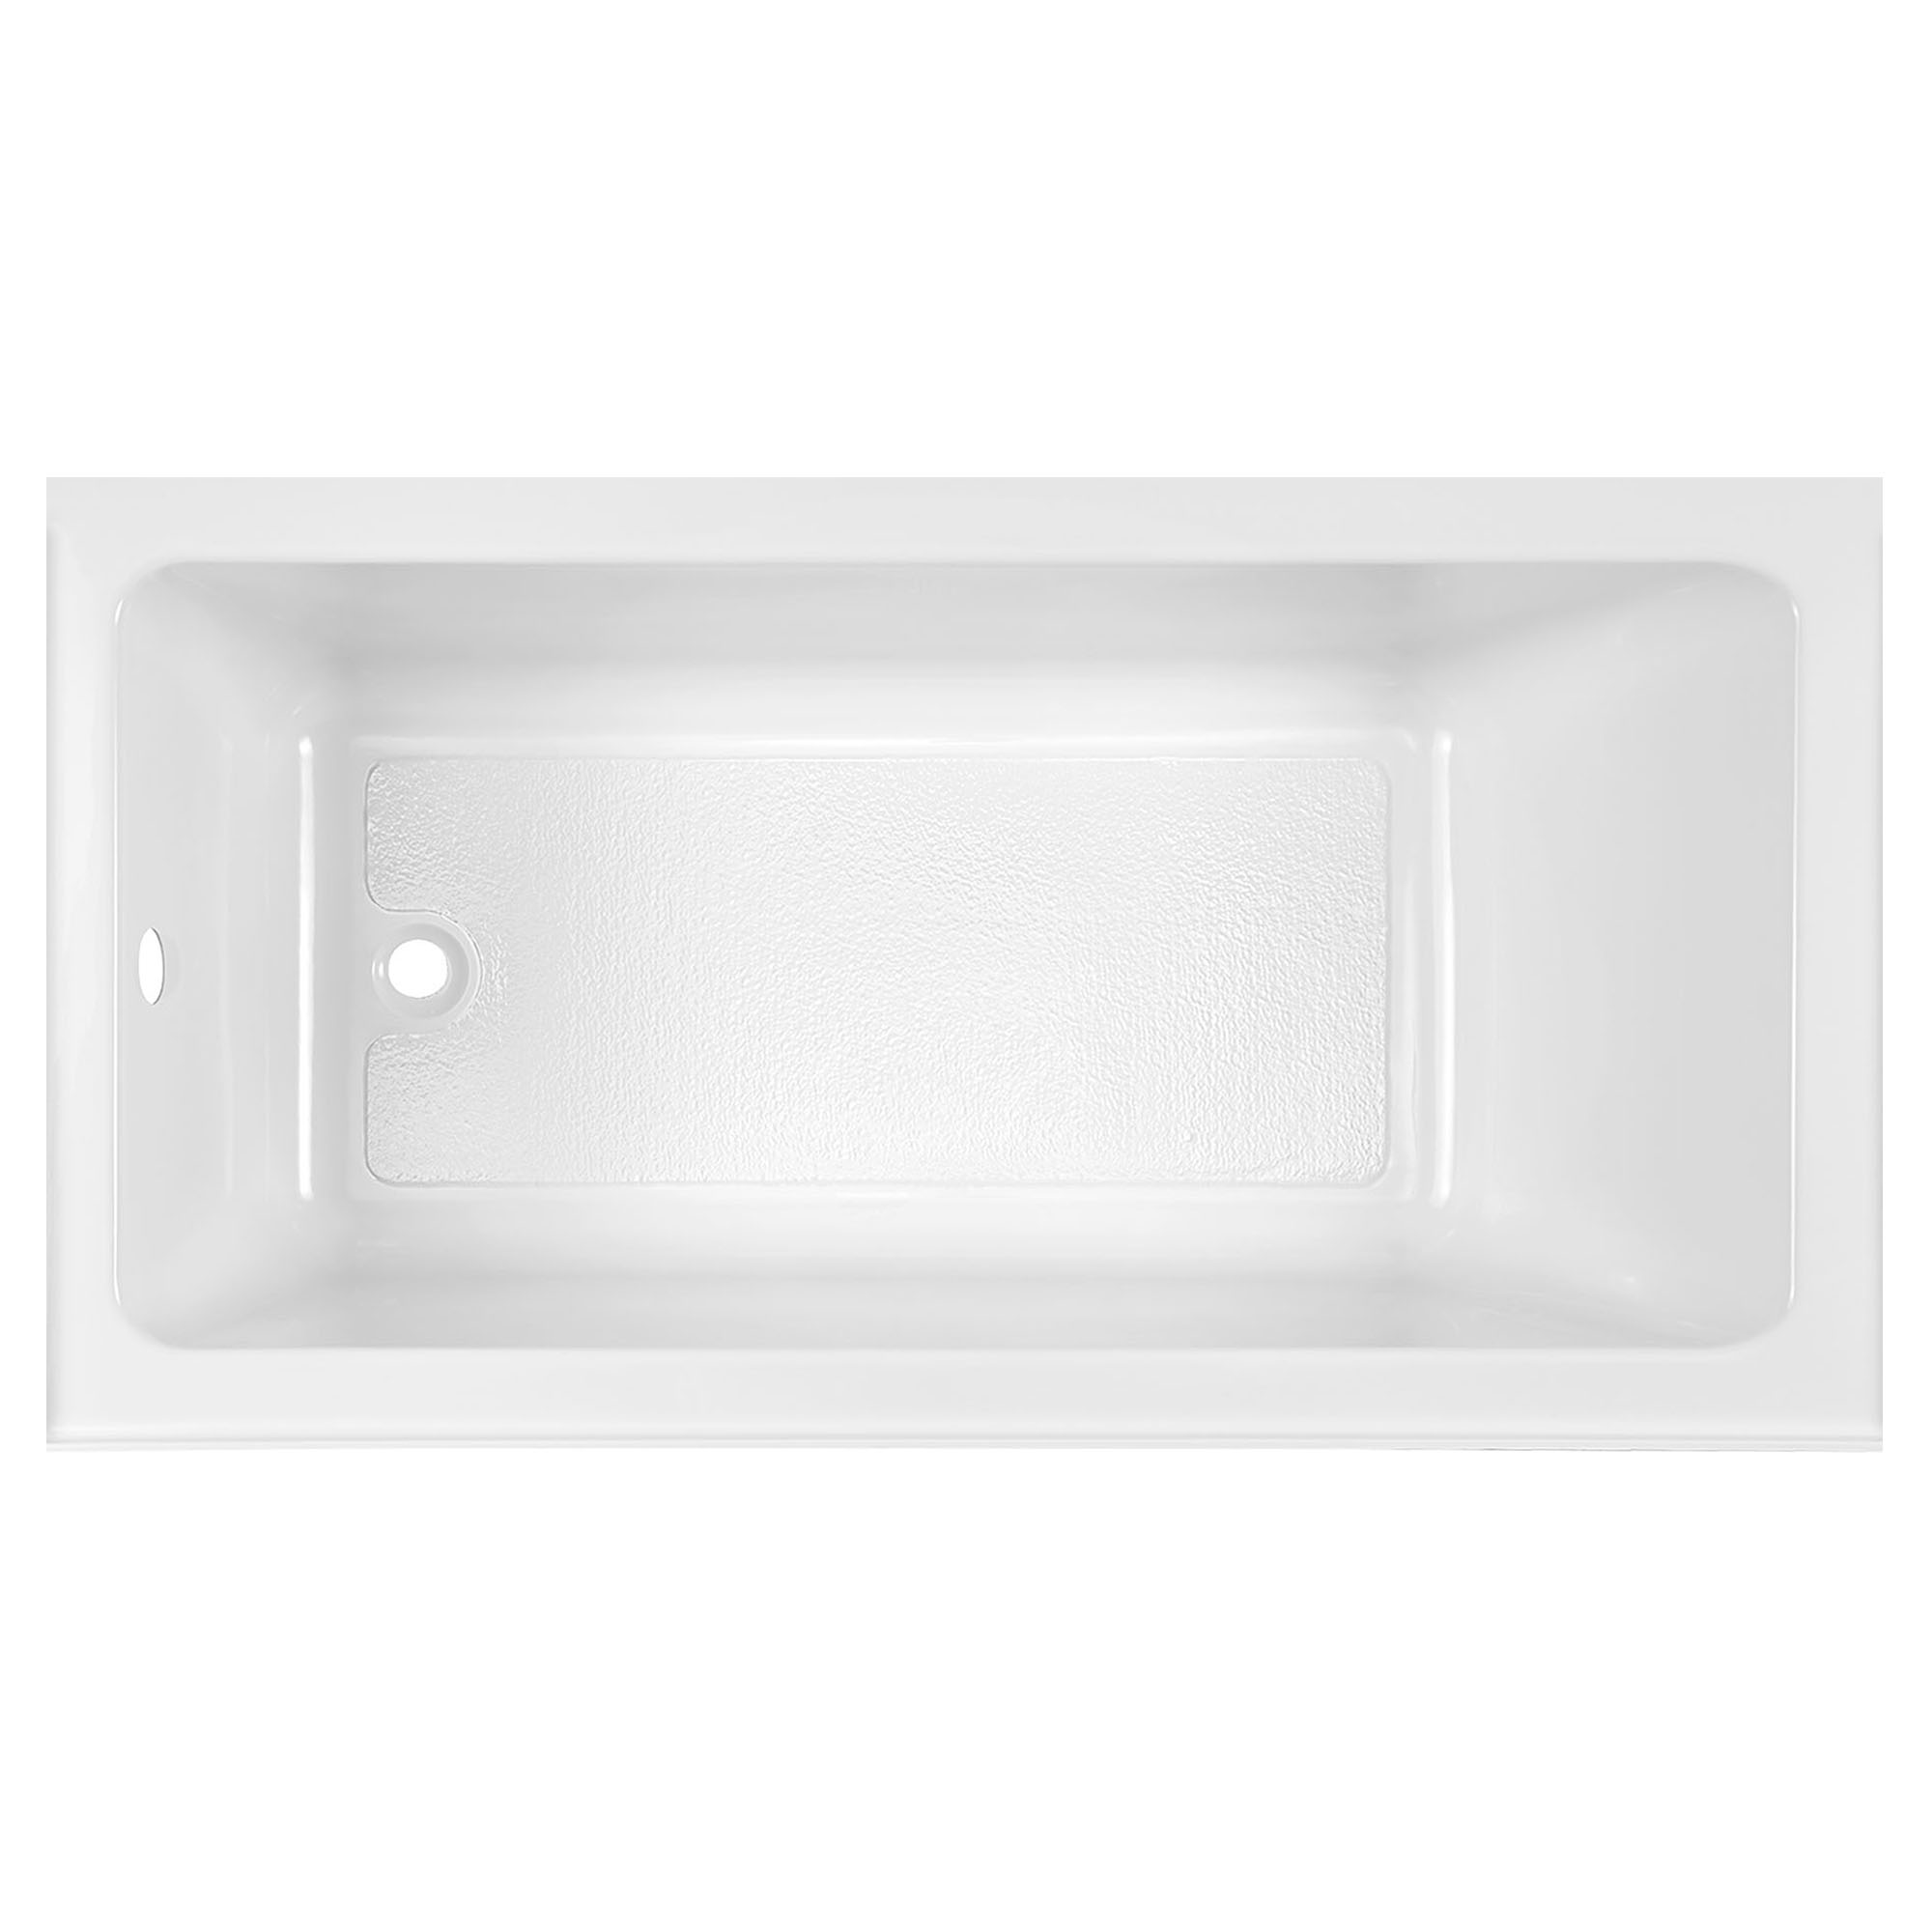 Studio® 60 x 30-Inch Integral Apron Bathtub Above Floor Rough With Left-Hand Outlet